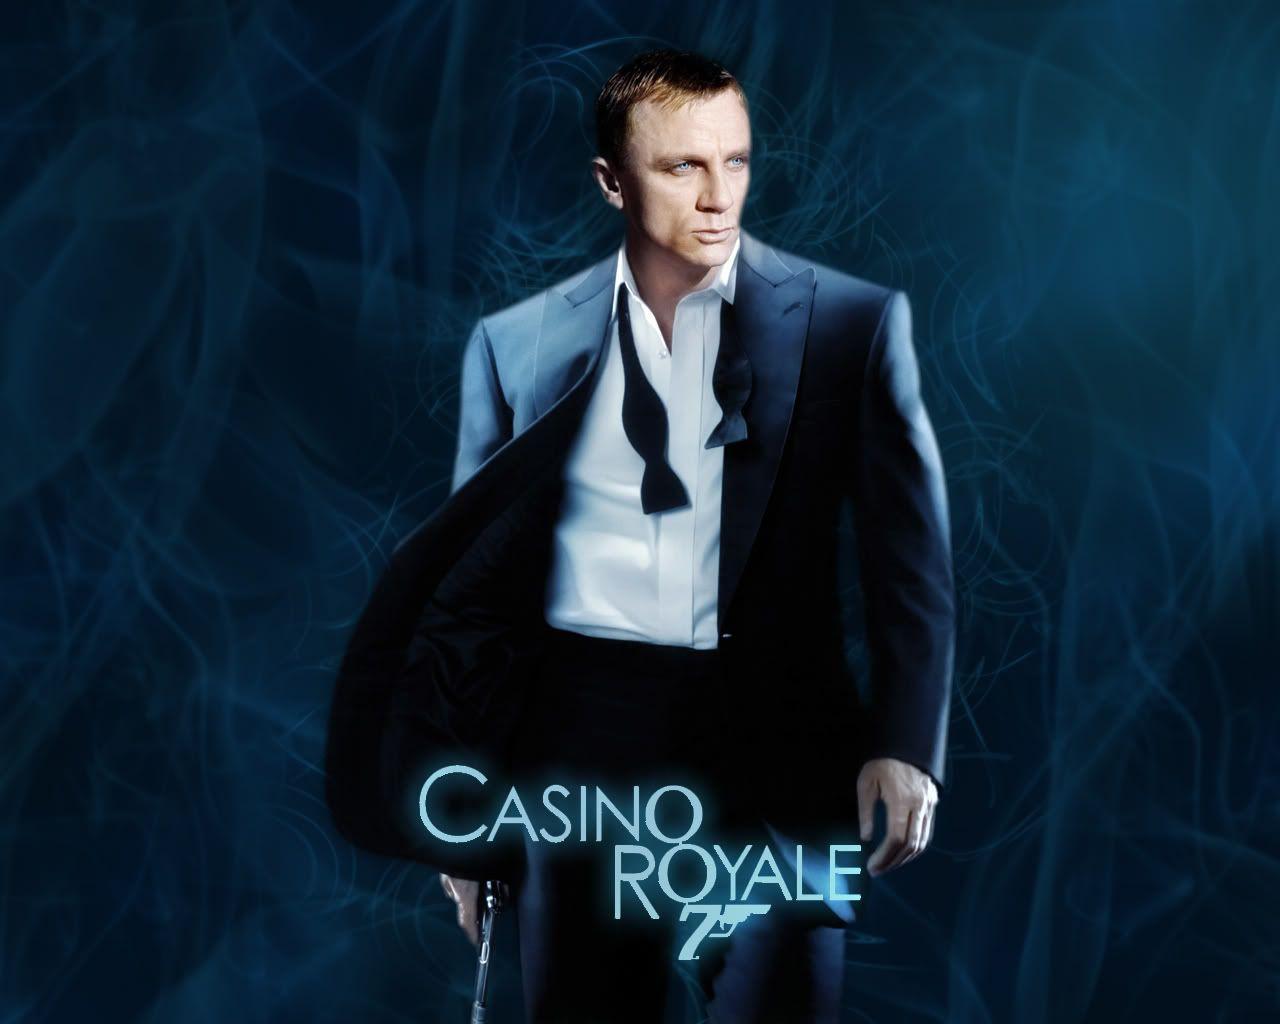 casino royale full movie download free